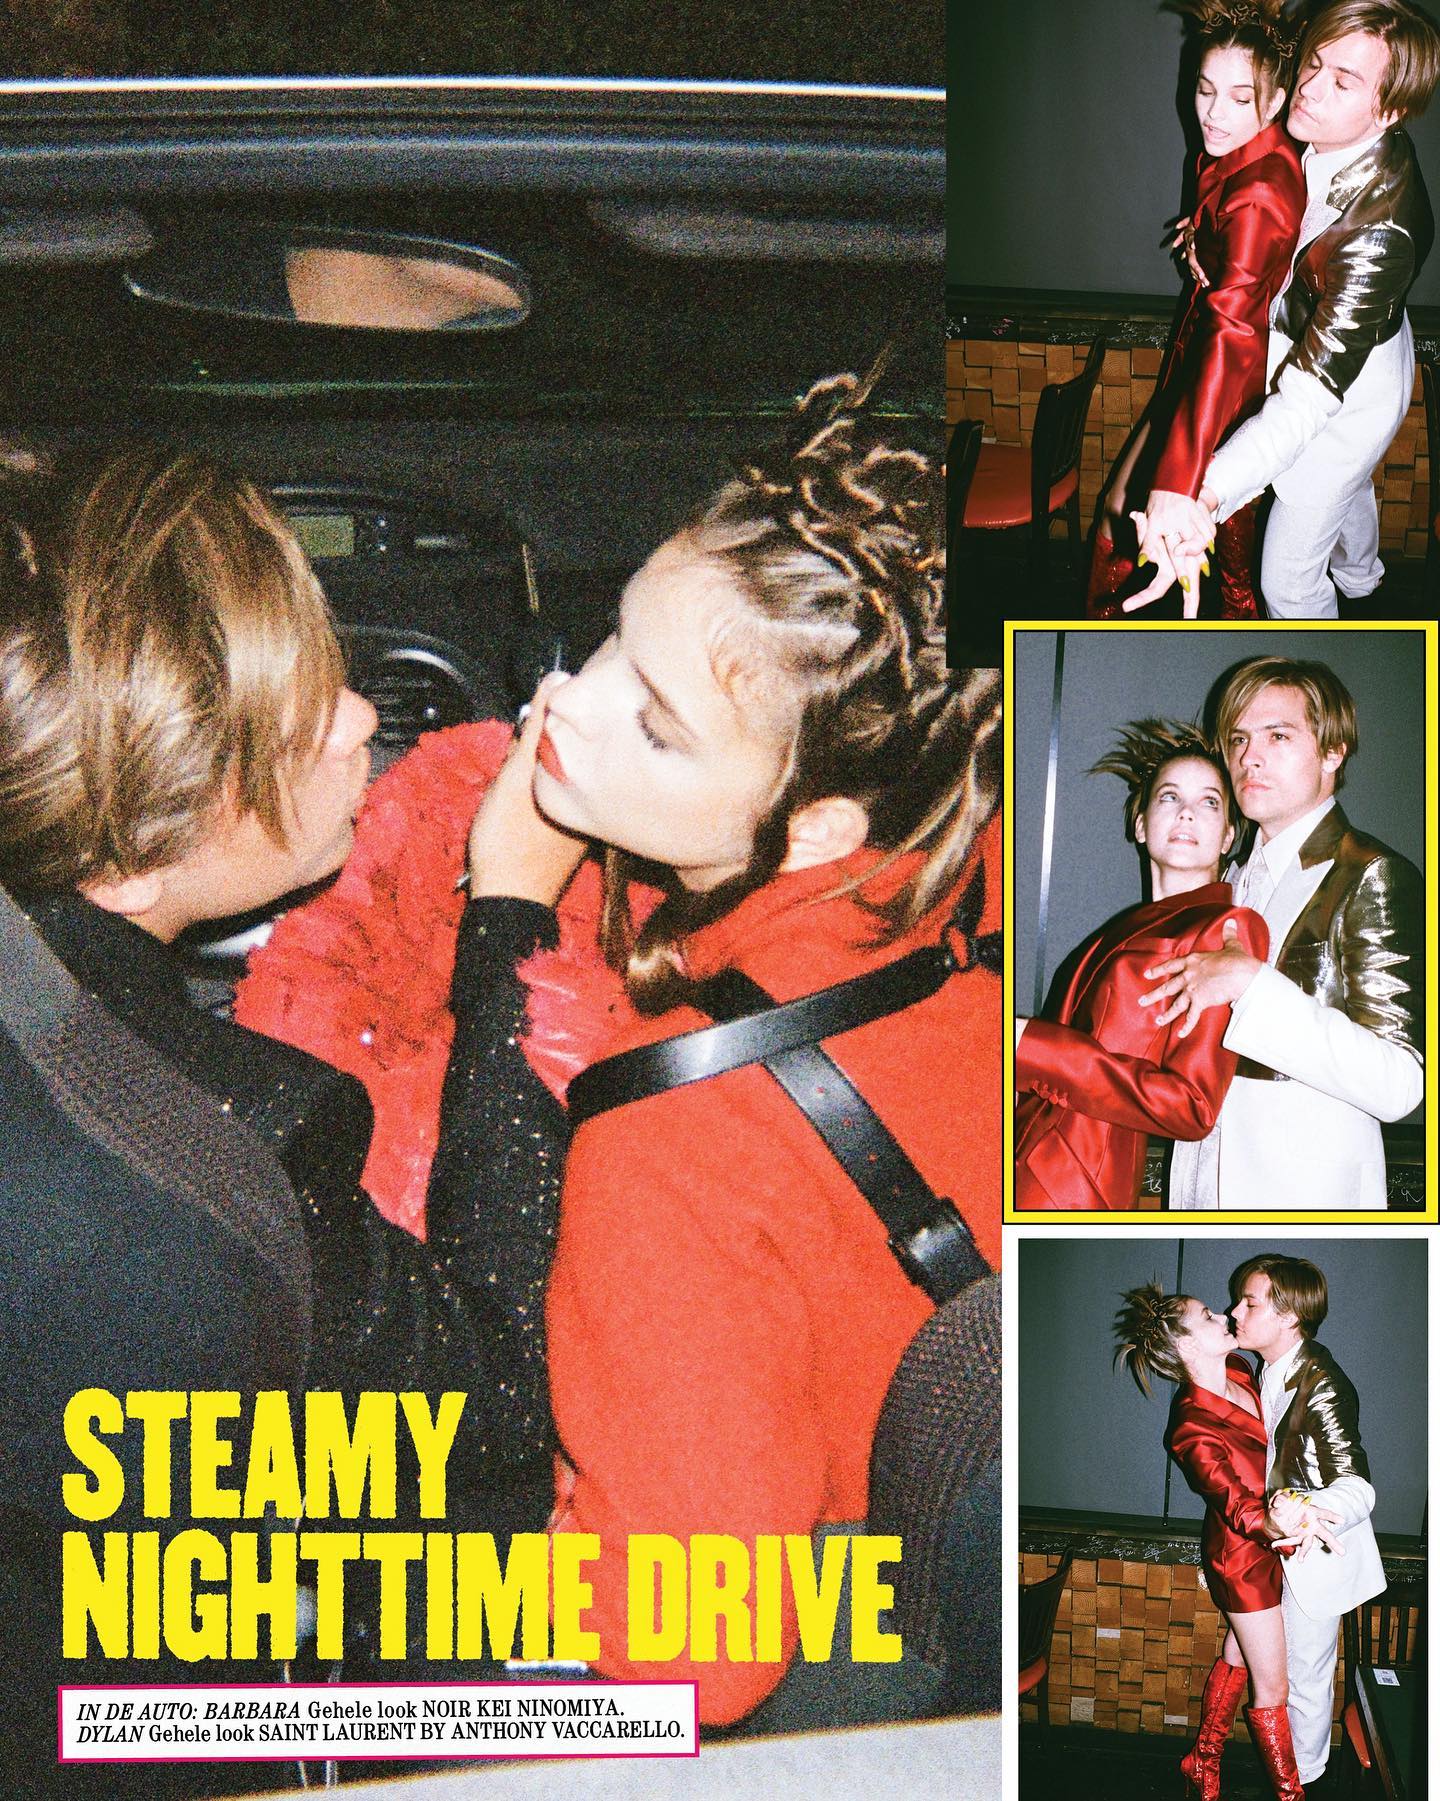 Barbara Palvin y Dylan Sprouse Hit the Cover! - Photo 4